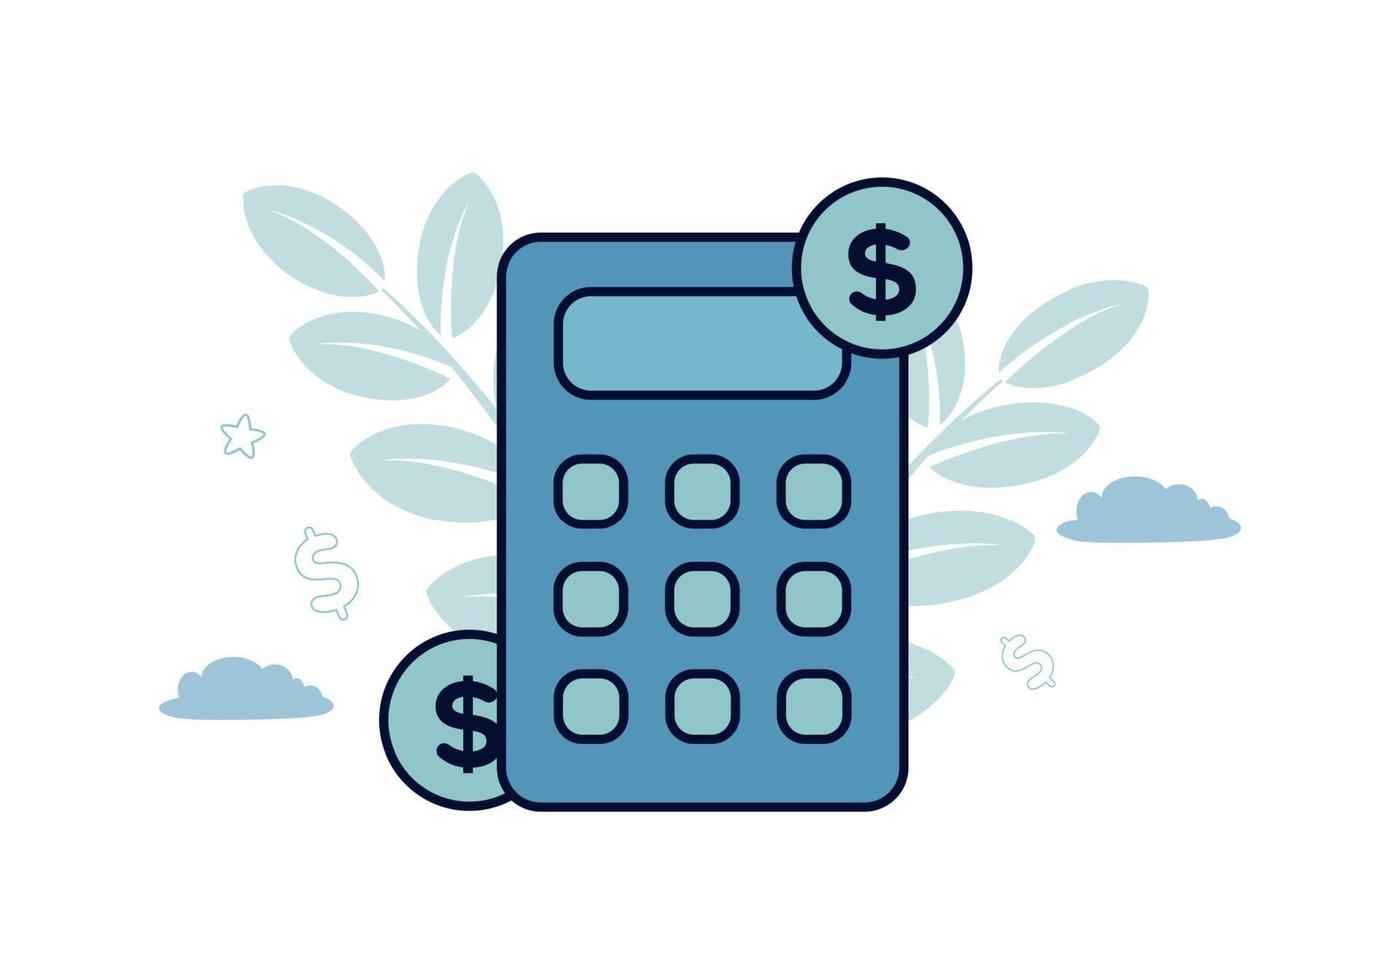 Finance. Vector illustration of accounting. Calculator, dollar coins on the sides, against the background of leaves, cloud, star